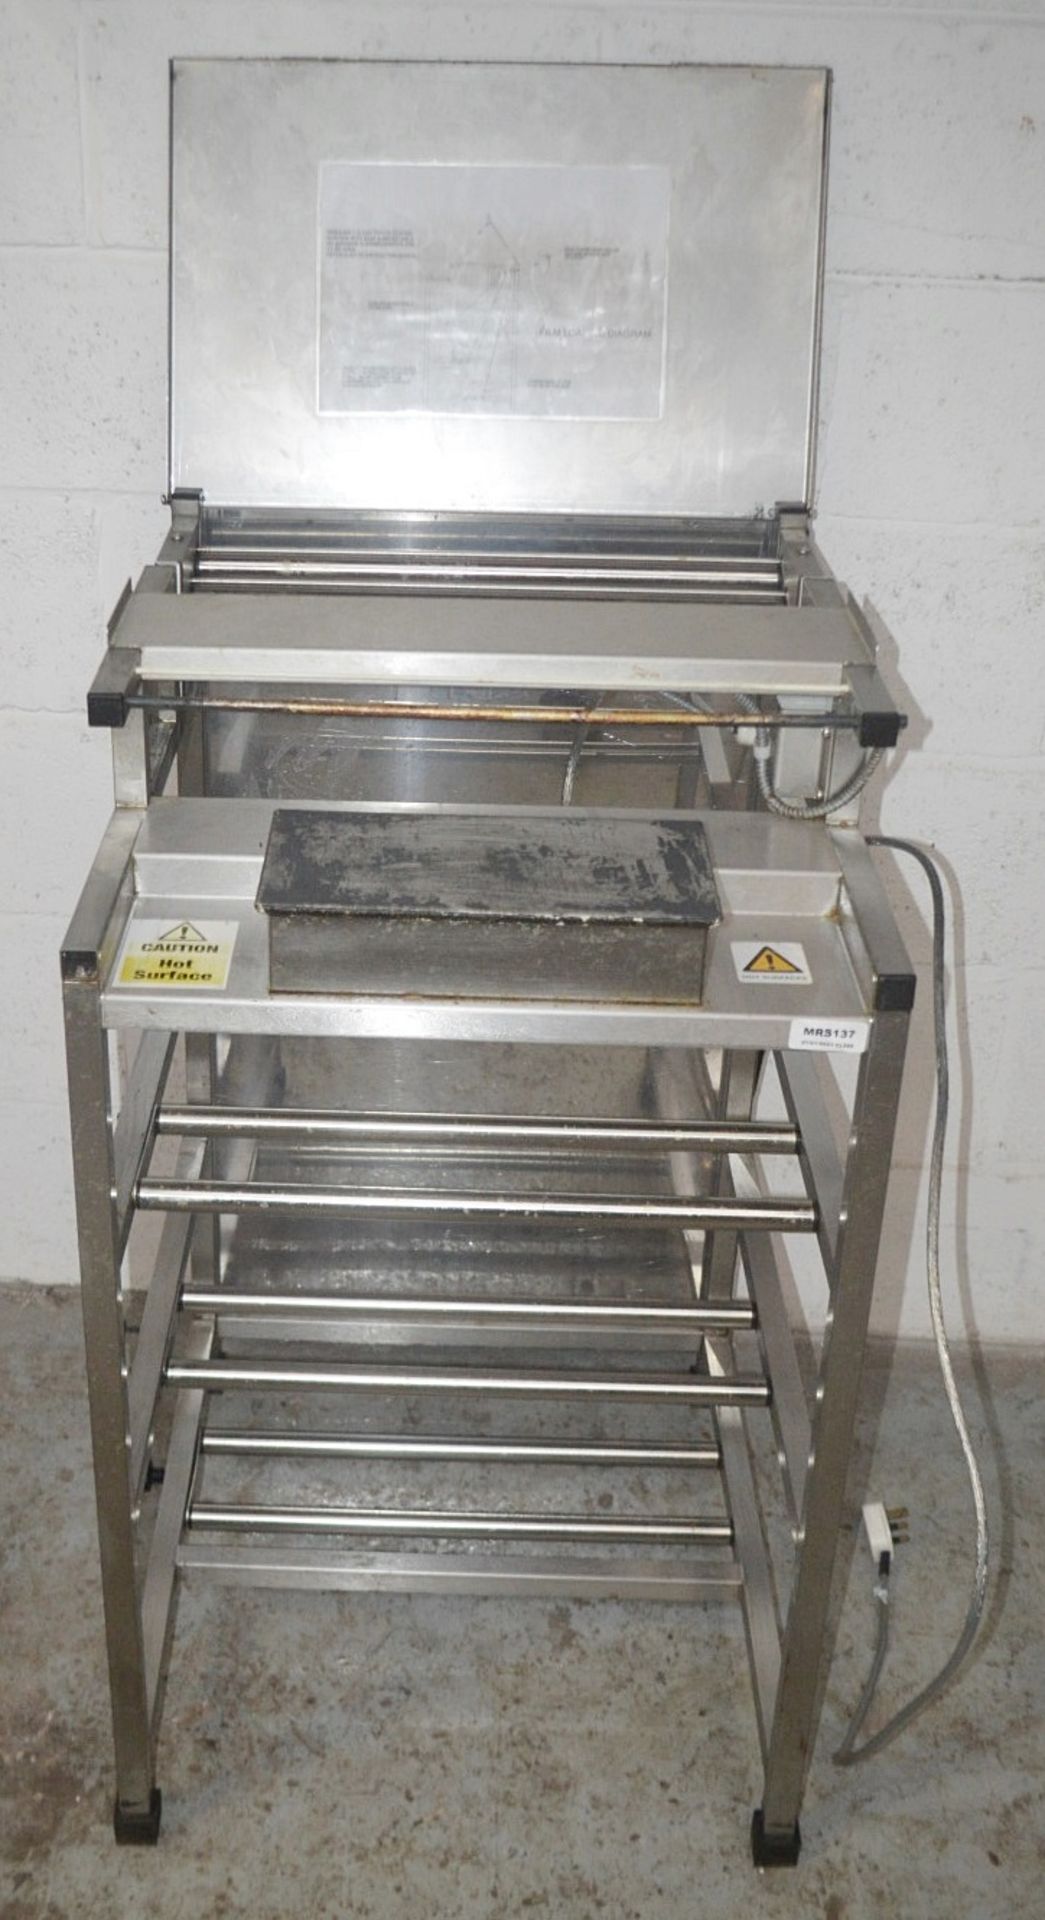 1 x Stainless Steel Commercial Kitchen Sealer Bench With Modesty Panel - Dimensions: H98 x W56 x - Image 2 of 6